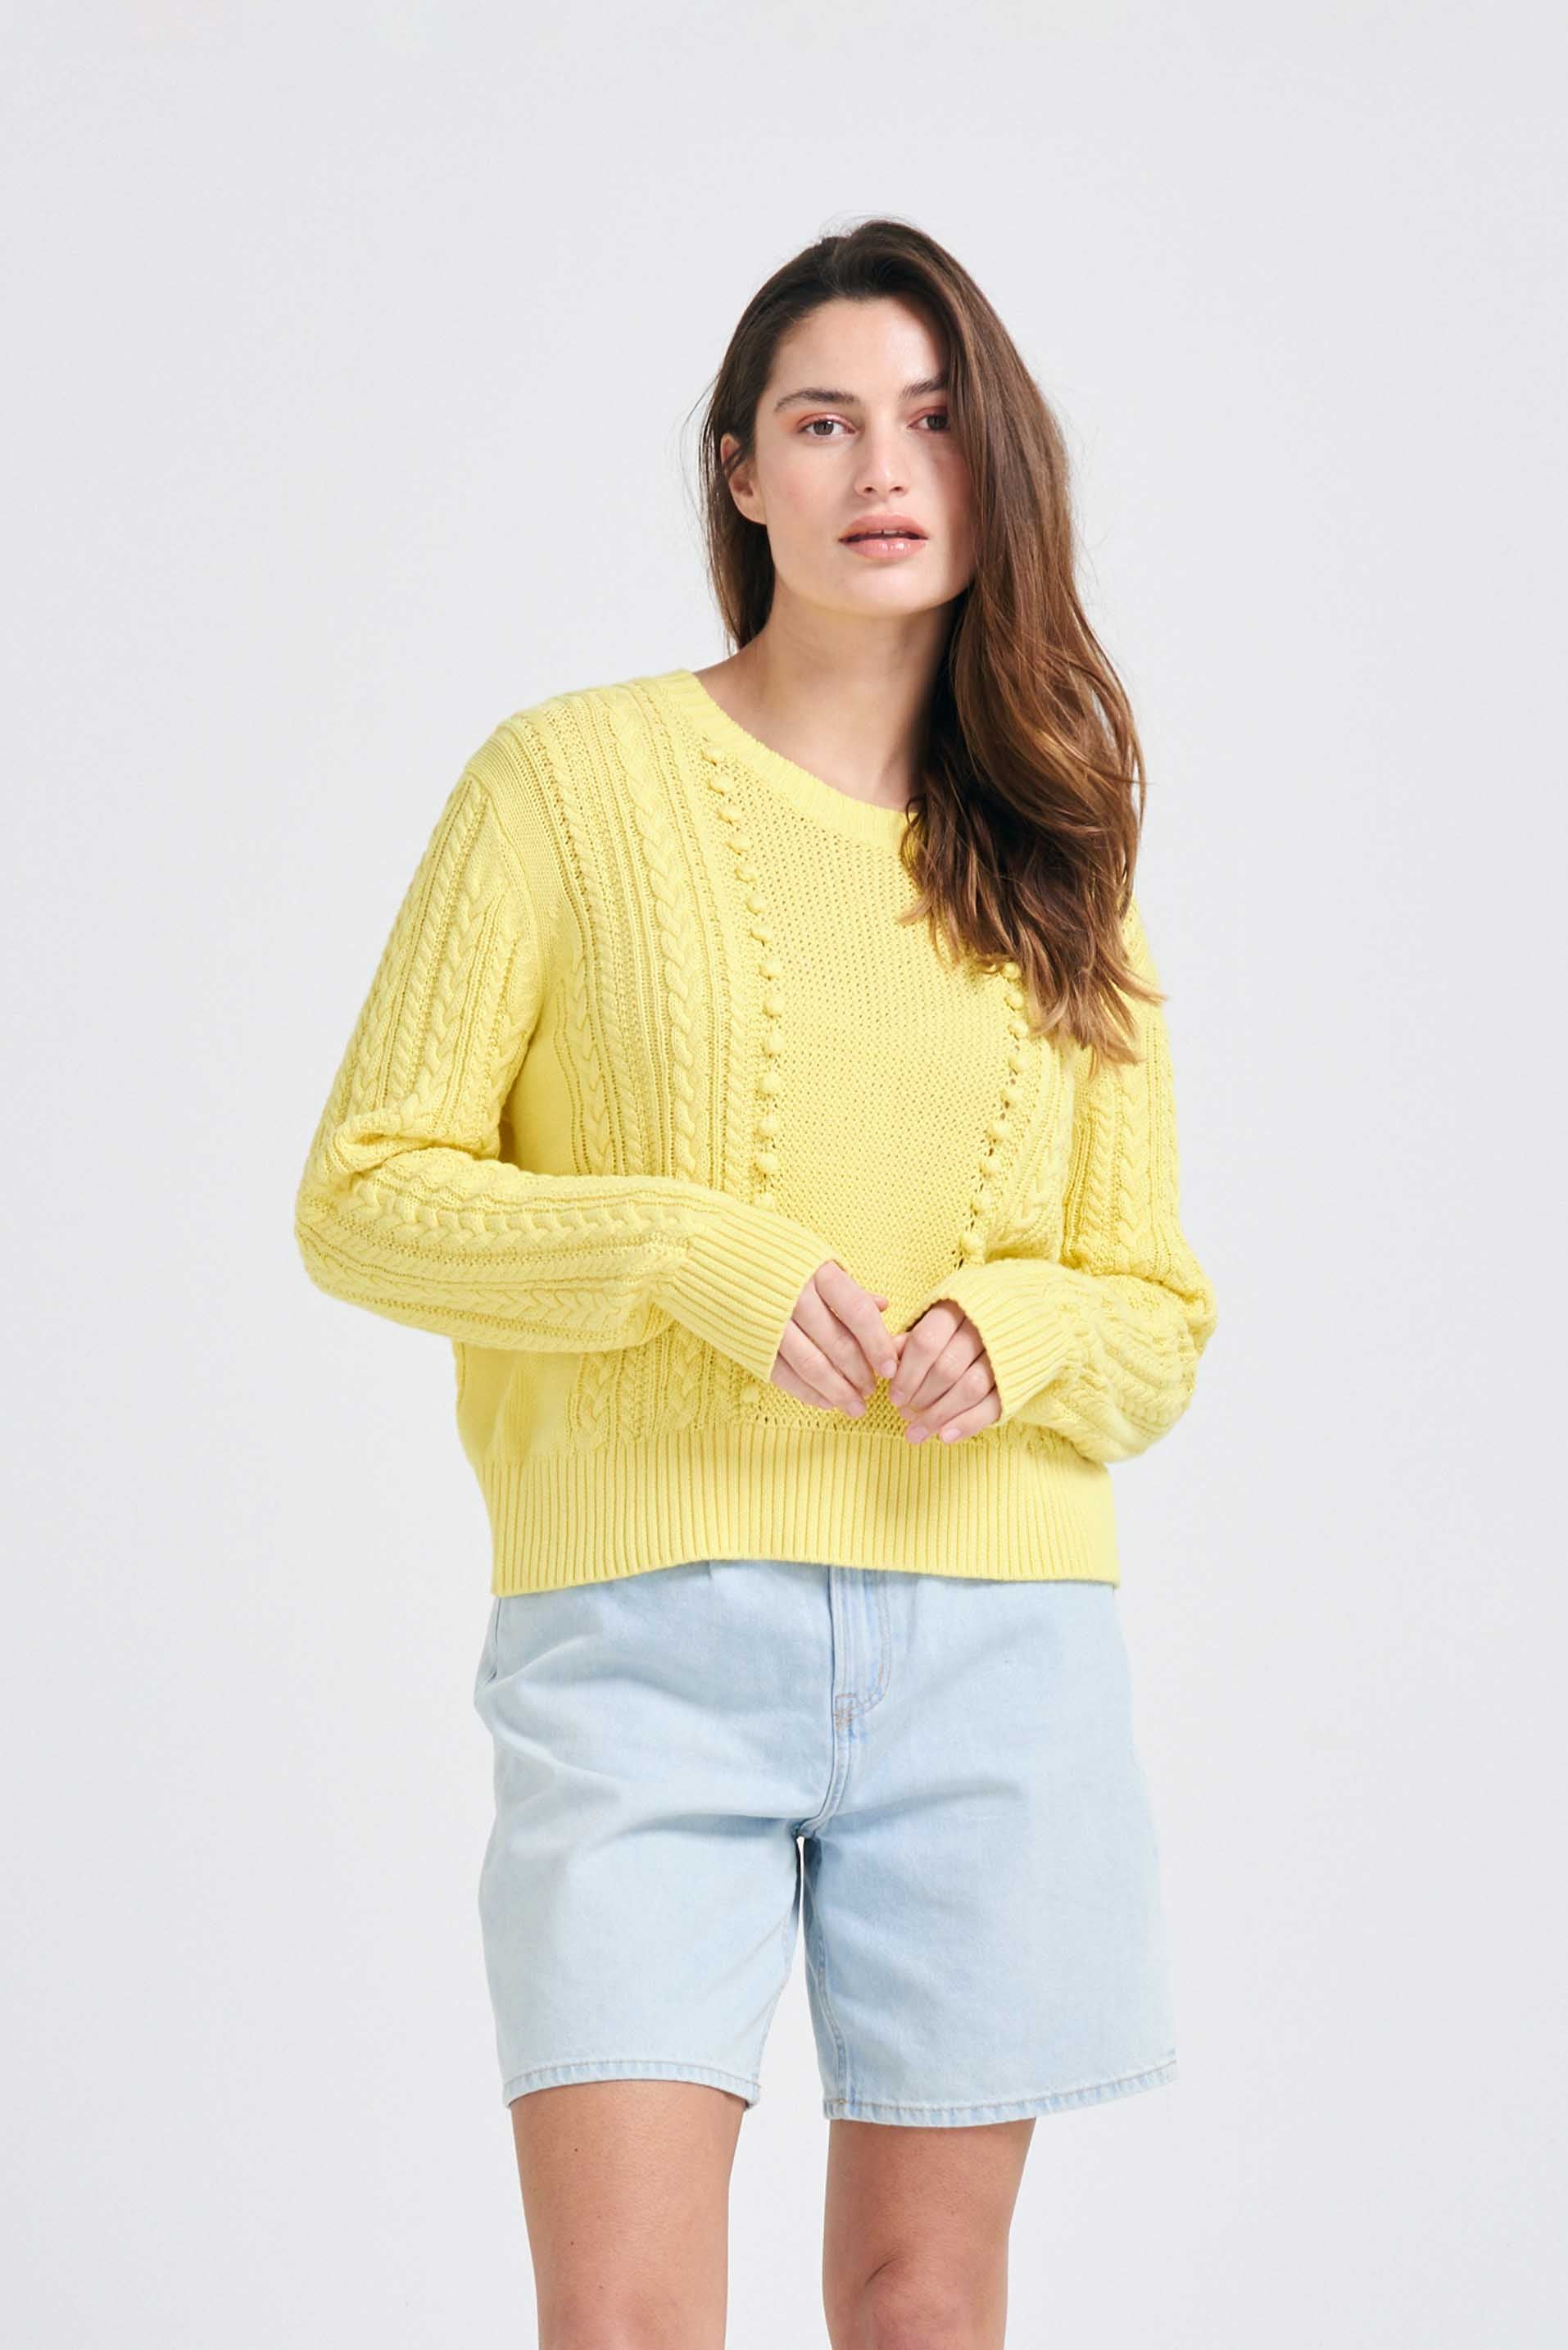 Brown haired female model wearing Jumper1234 Yellow cotton aran crew neck jumper with a ribbon tie back, back shot